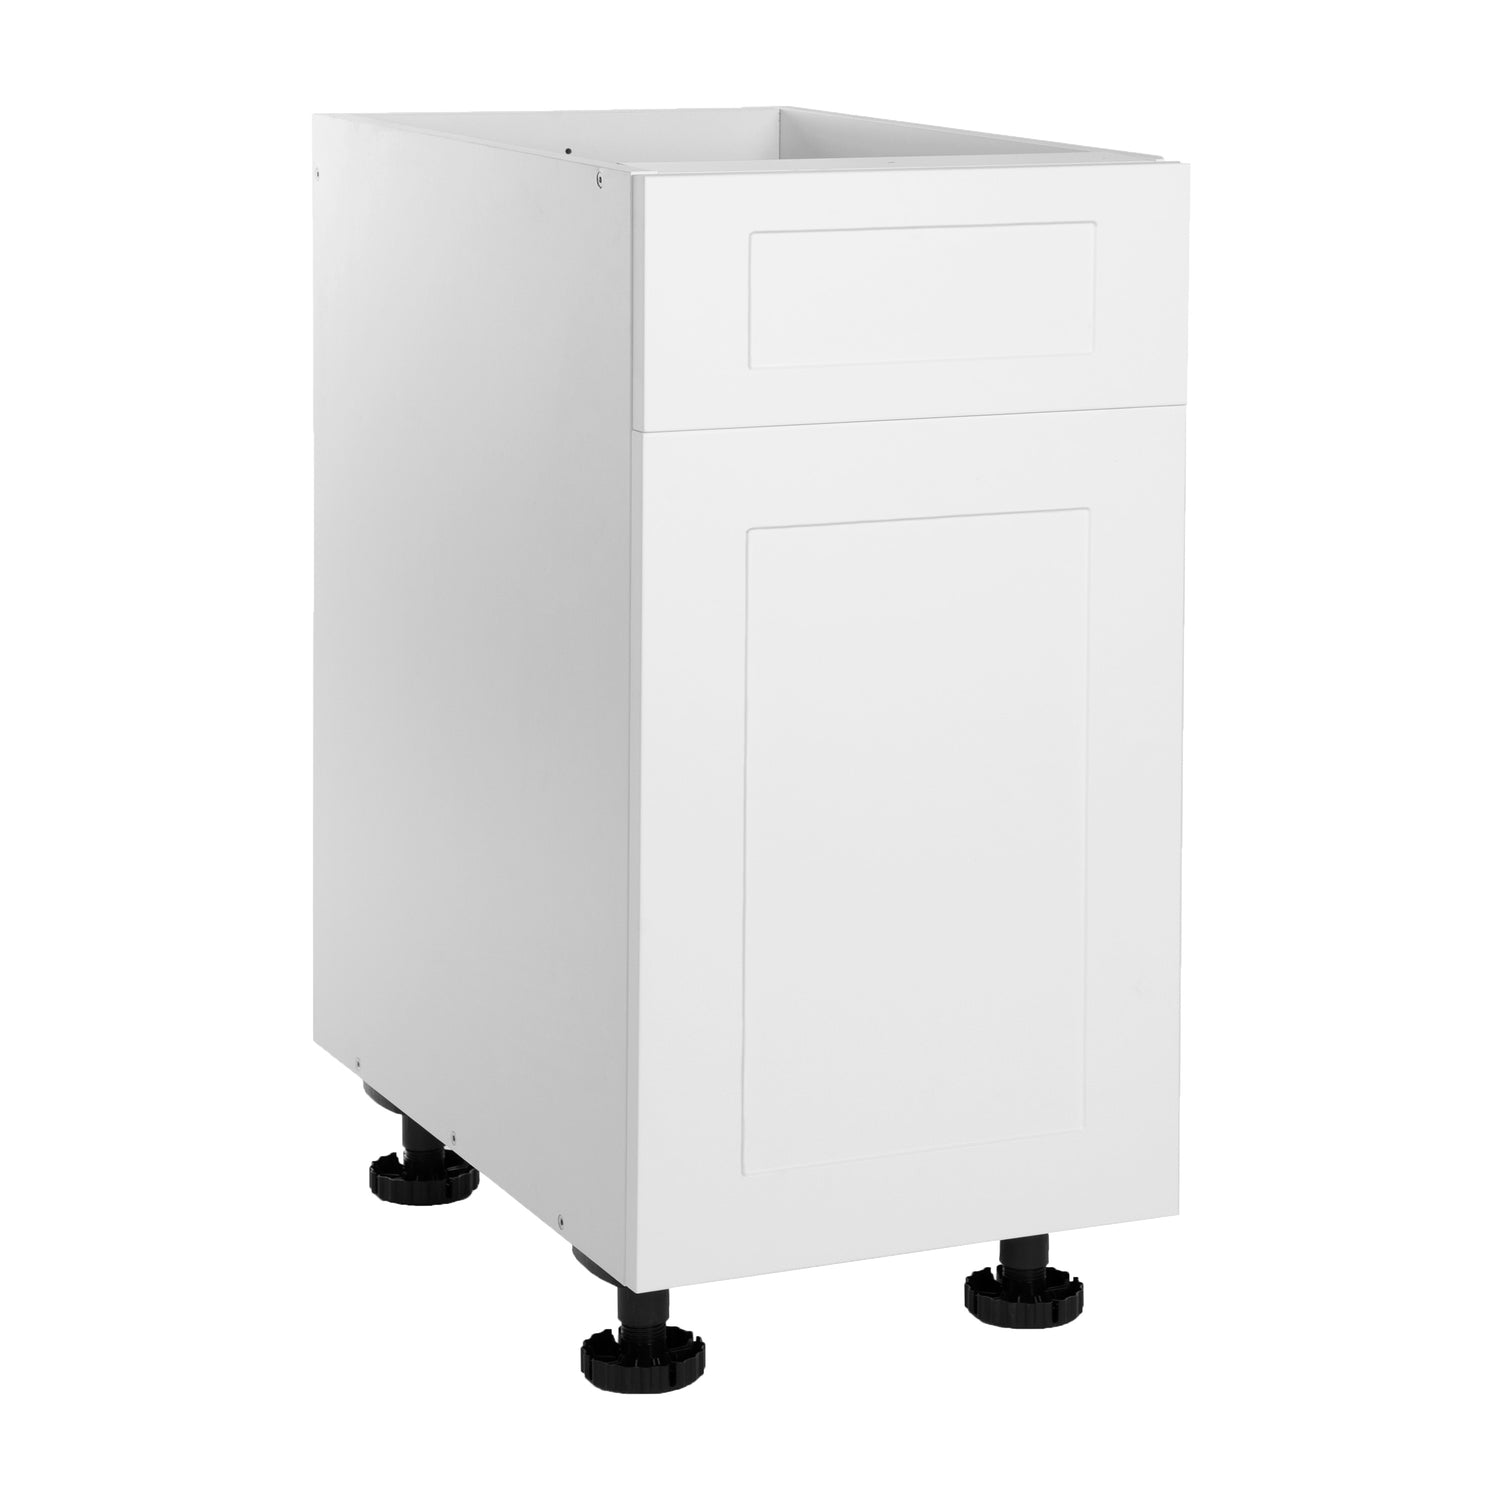 Quick Assemble Modern Style with Soft Close, White Shaker Base Kitchen Cabinet 1 Drawer (21 in W x 24 in D x 34.50 in H)